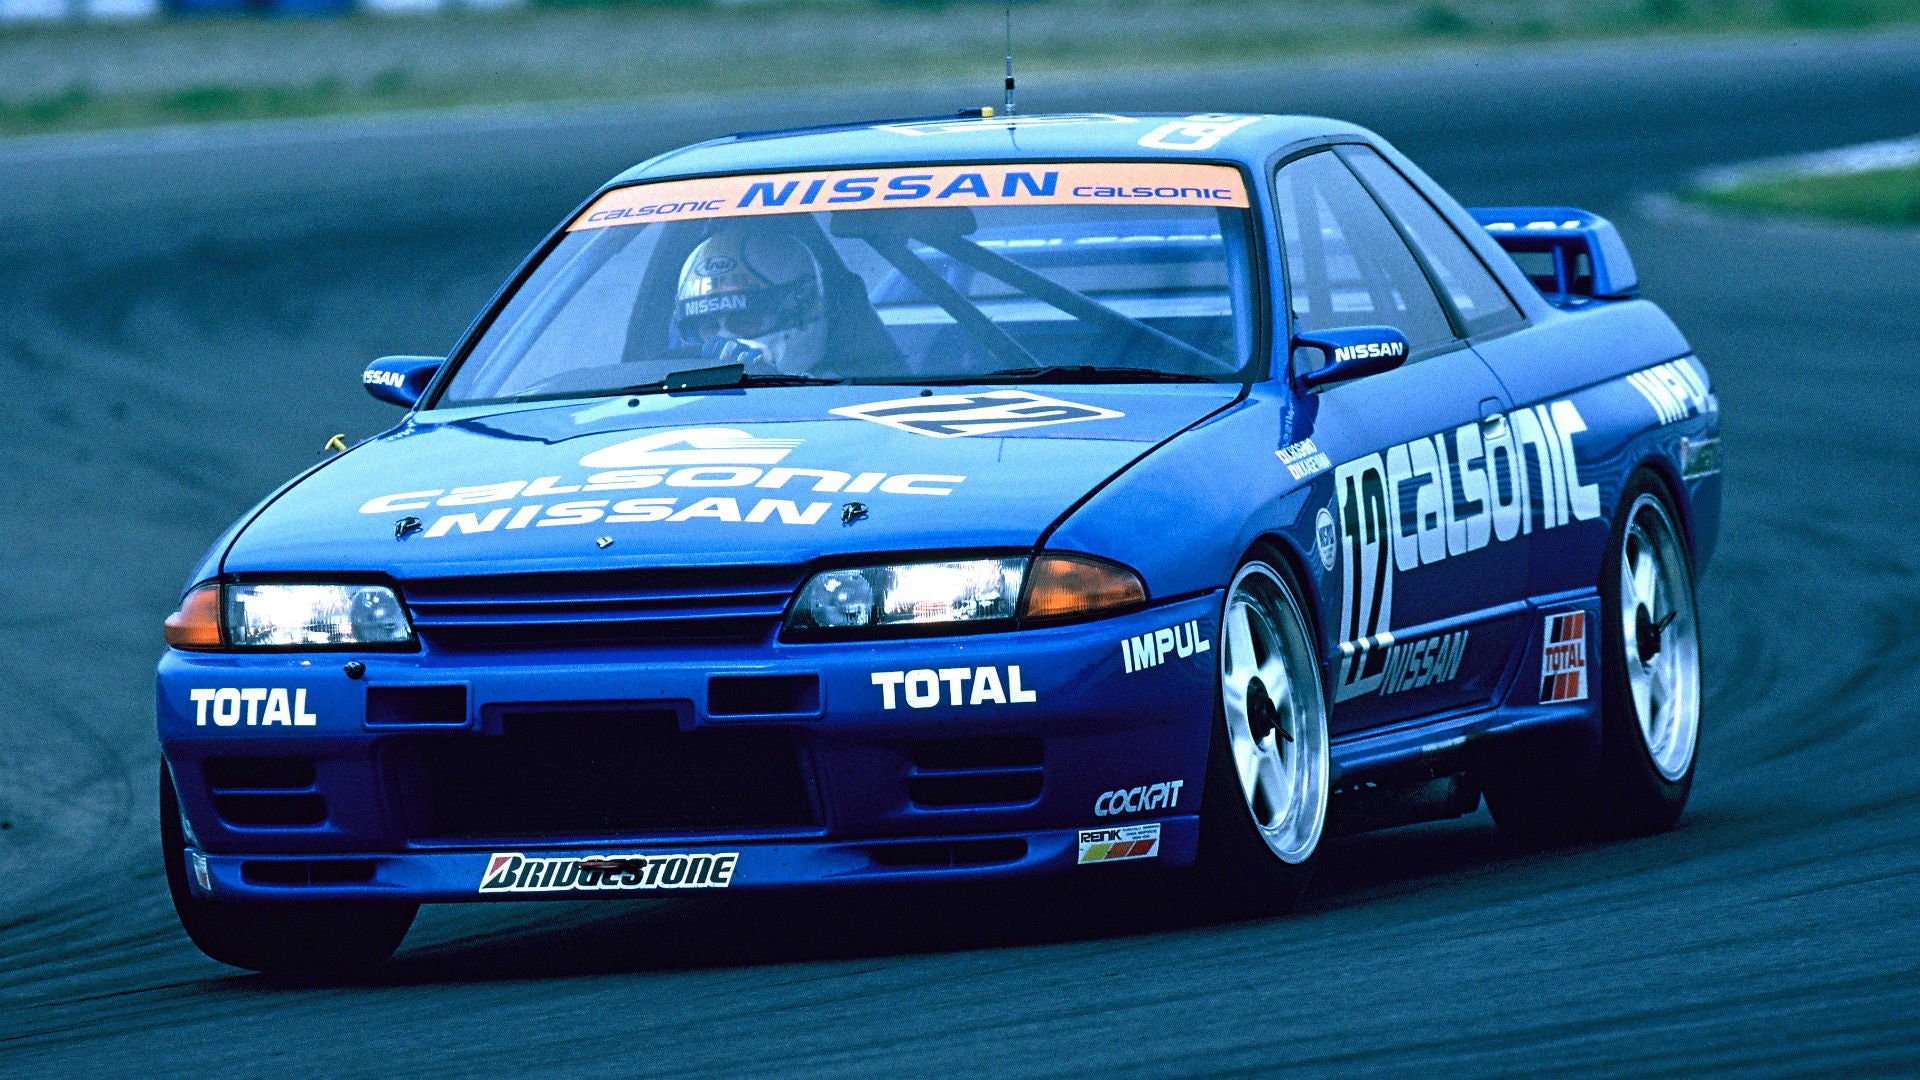 The Nissan Skyline GT-R R32 is Officially NISMO Fans’ Favorite Race Car